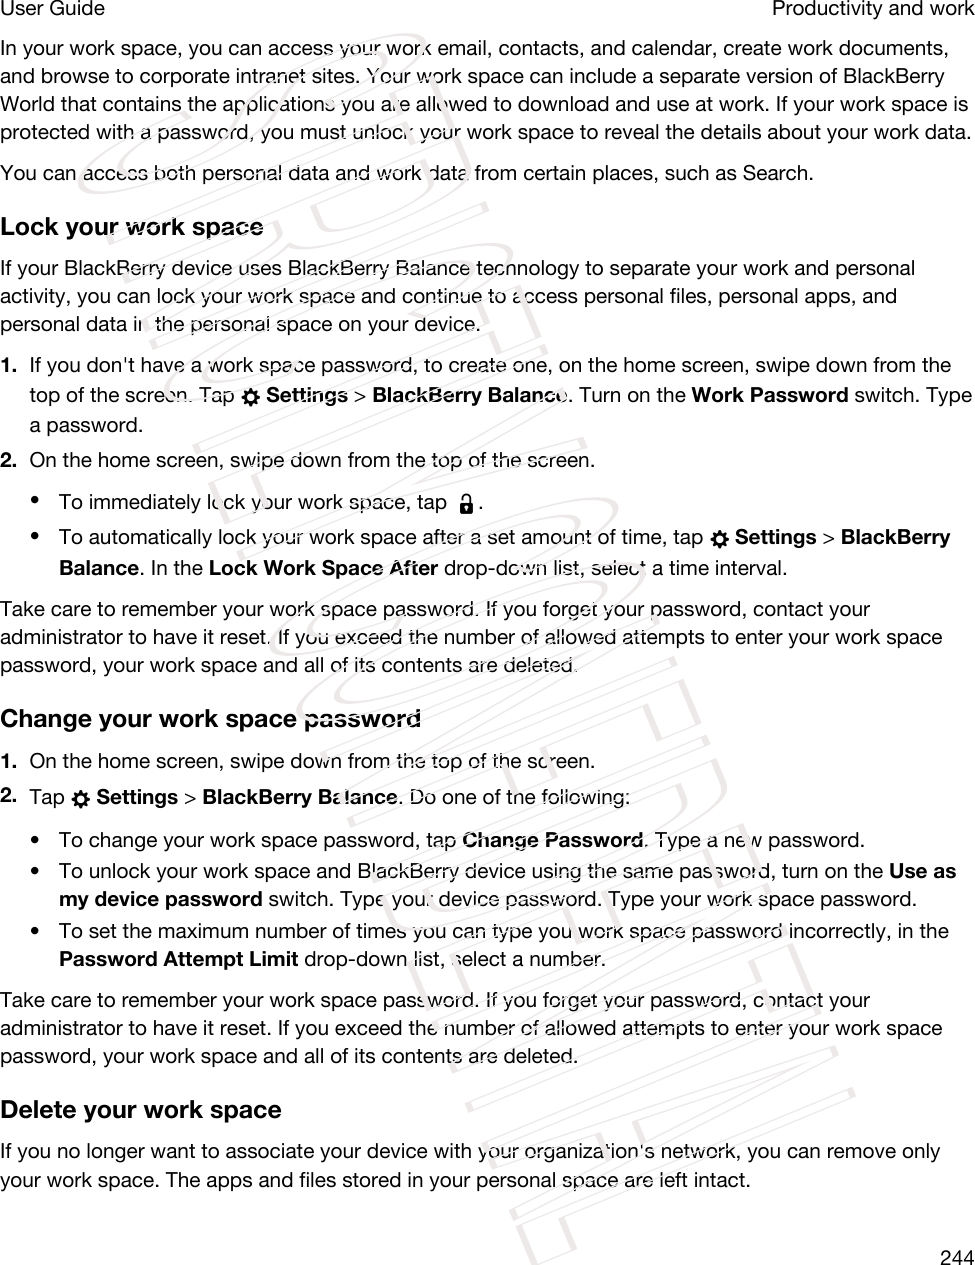 In your work space, you can access your work email, contacts, and calendar, create work documents, and browse to corporate intranet sites. Your work space can include a separate version of BlackBerry World that contains the applications you are allowed to download and use at work. If your work space is protected with a password, you must unlock your work space to reveal the details about your work data.You can access both personal data and work data from certain places, such as Search. Lock your work spaceIf your BlackBerry device uses BlackBerry Balance technology to separate your work and personal activity, you can lock your work space and continue to access personal files, personal apps, and personal data in the personal space on your device.1. If you don&apos;t have a work space password, to create one, on the home screen, swipe down from the top of the screen. Tap   Settings &gt; BlackBerry Balance. Turn on the Work Password switch. Type a password.2. On the home screen, swipe down from the top of the screen.•To immediately lock your work space, tap  .•To automatically lock your work space after a set amount of time, tap   Settings &gt; BlackBerry Balance. In the Lock Work Space After drop-down list, select a time interval.Take care to remember your work space password. If you forget your password, contact your administrator to have it reset. If you exceed the number of allowed attempts to enter your work space password, your work space and all of its contents are deleted.Change your work space password1. On the home screen, swipe down from the top of the screen.2. Tap   Settings &gt; BlackBerry Balance. Do one of the following:• To change your work space password, tap Change Password. Type a new password.• To unlock your work space and BlackBerry device using the same password, turn on the Use as my device password switch. Type your device password. Type your work space password.• To set the maximum number of times you can type you work space password incorrectly, in the Password Attempt Limit drop-down list, select a number.Take care to remember your work space password. If you forget your password, contact your administrator to have it reset. If you exceed the number of allowed attempts to enter your work space password, your work space and all of its contents are deleted.Delete your work spaceIf you no longer want to associate your device with your organization&apos;s network, you can remove only your work space. The apps and files stored in your personal space are left intact.Productivity and workUser Guide244STRICTLY CONFIDENTIAL